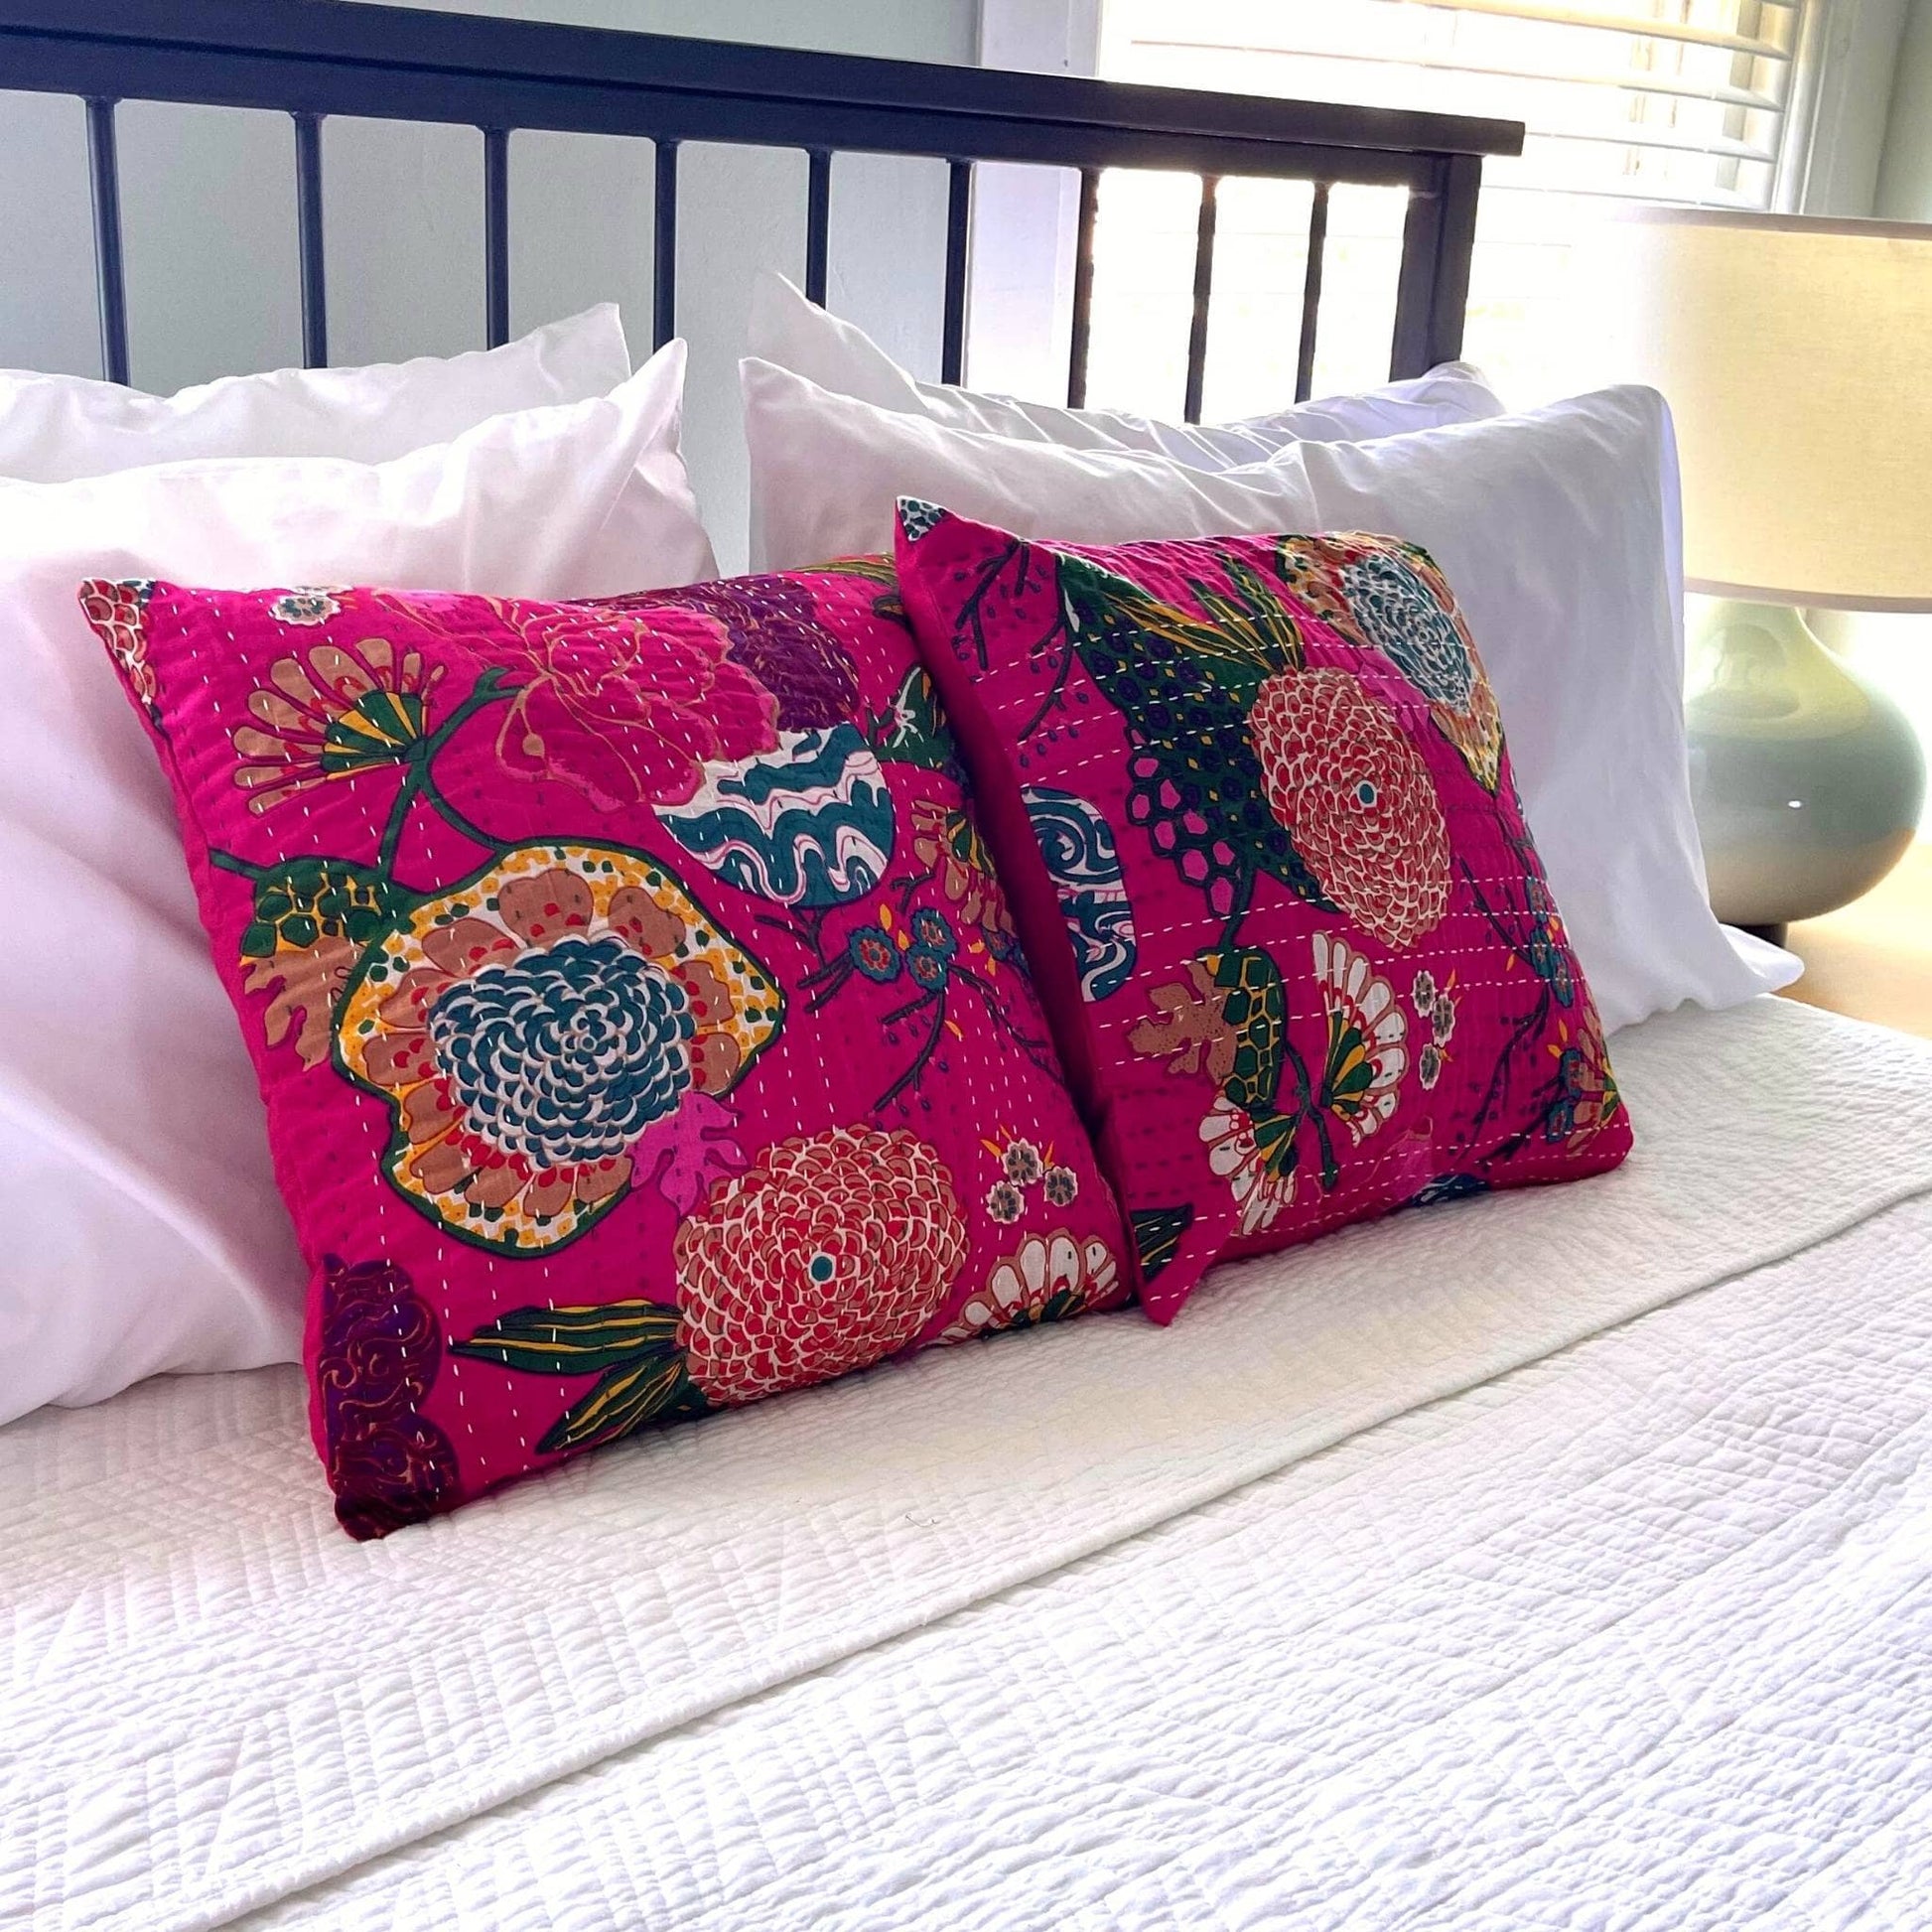 Matching set of pink kantha pillow covers in a bed with a white comforters.